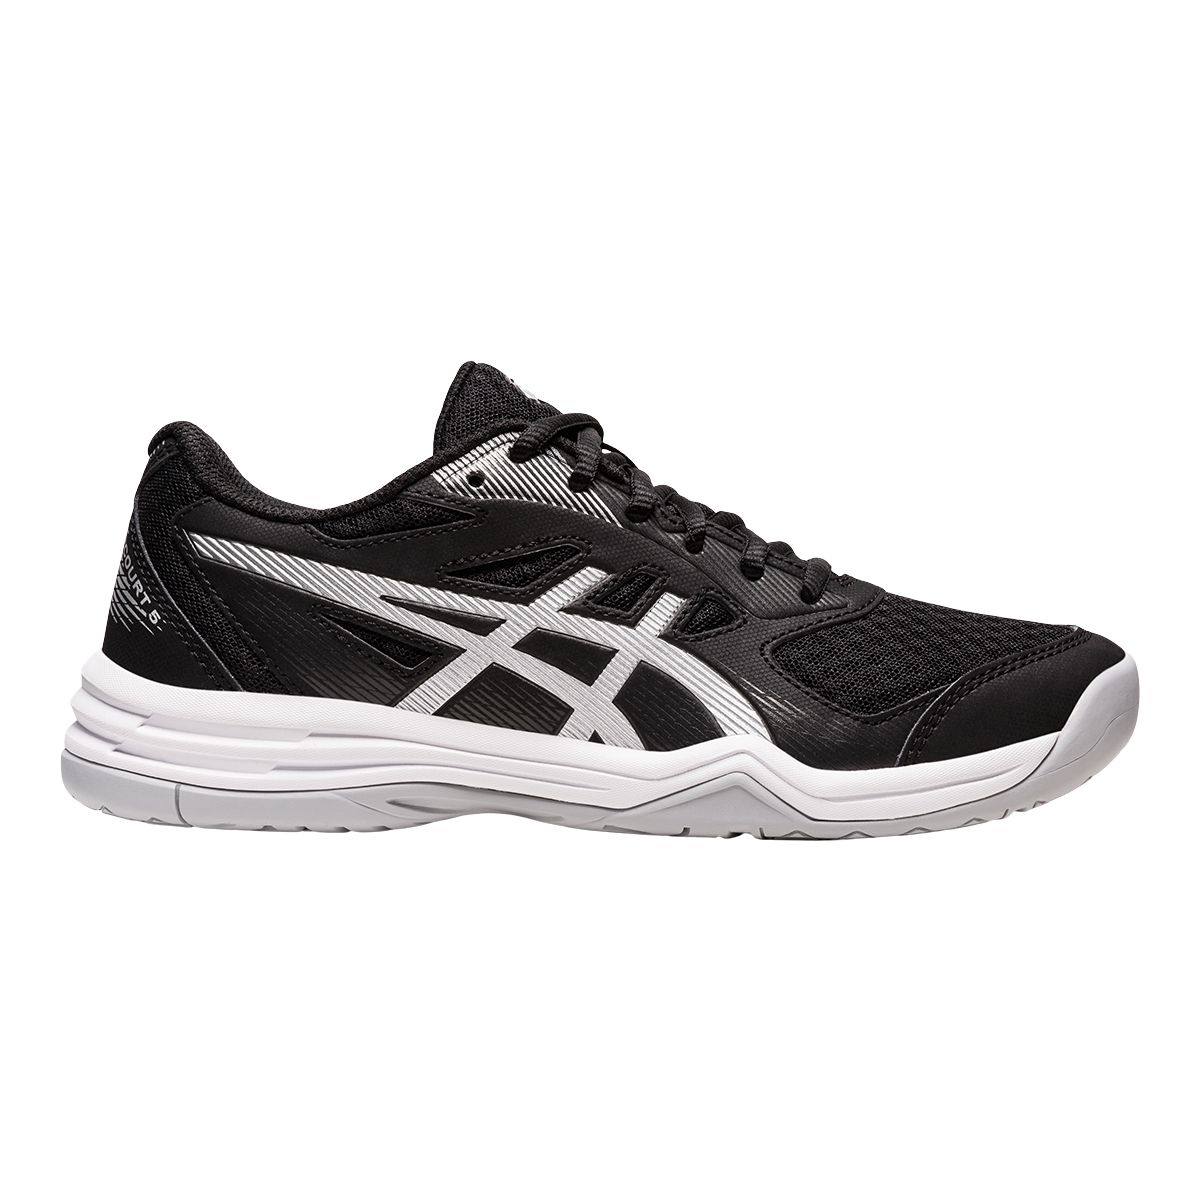 Image of Asics Women's Upcourt 5 Volleyball Shoes